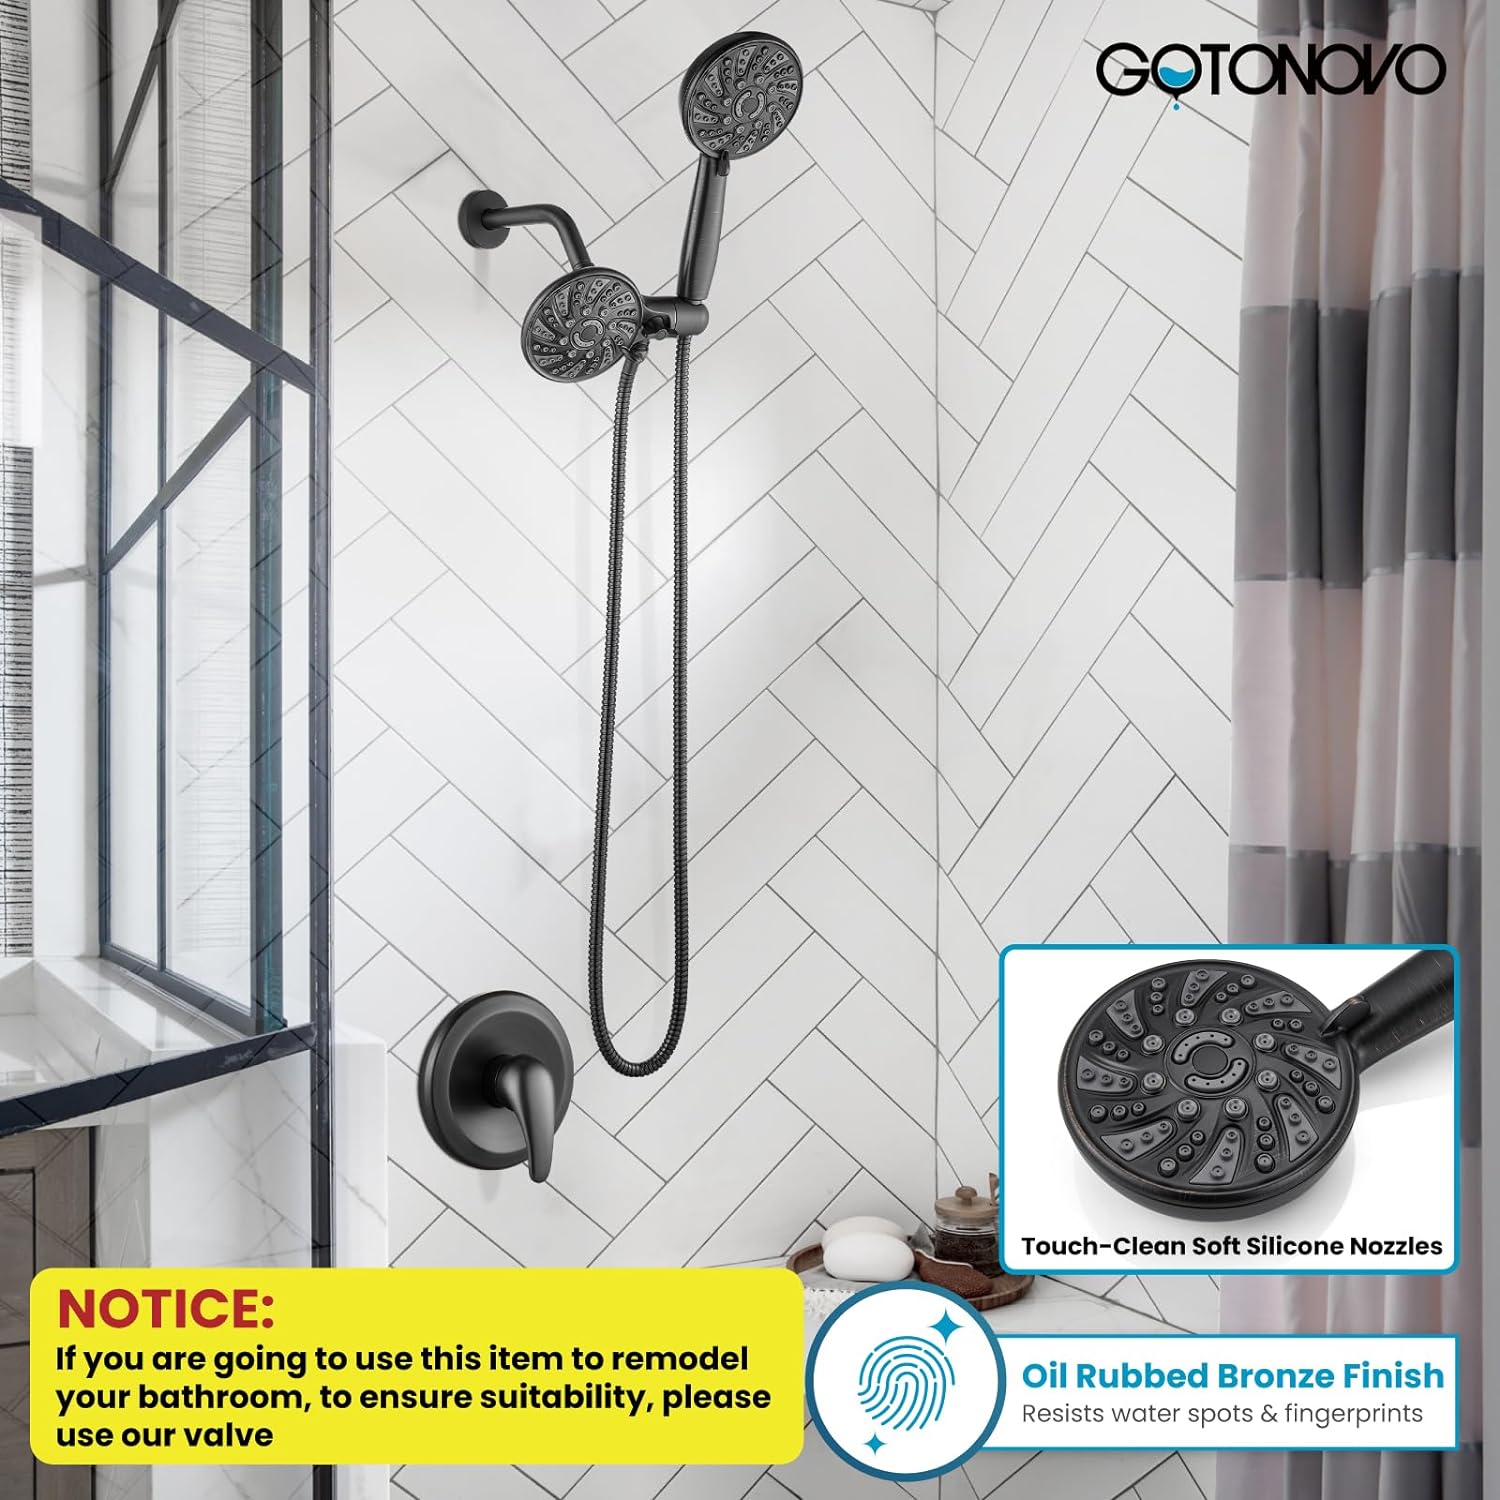 gotonovo Bathroon Shower Head Kit High Pressure Combo System Shower Faucet 5 Modes ABS Handheld Spray Shower Trim Kit Valve Included Without Tubspout Oil Rubbed Bronze